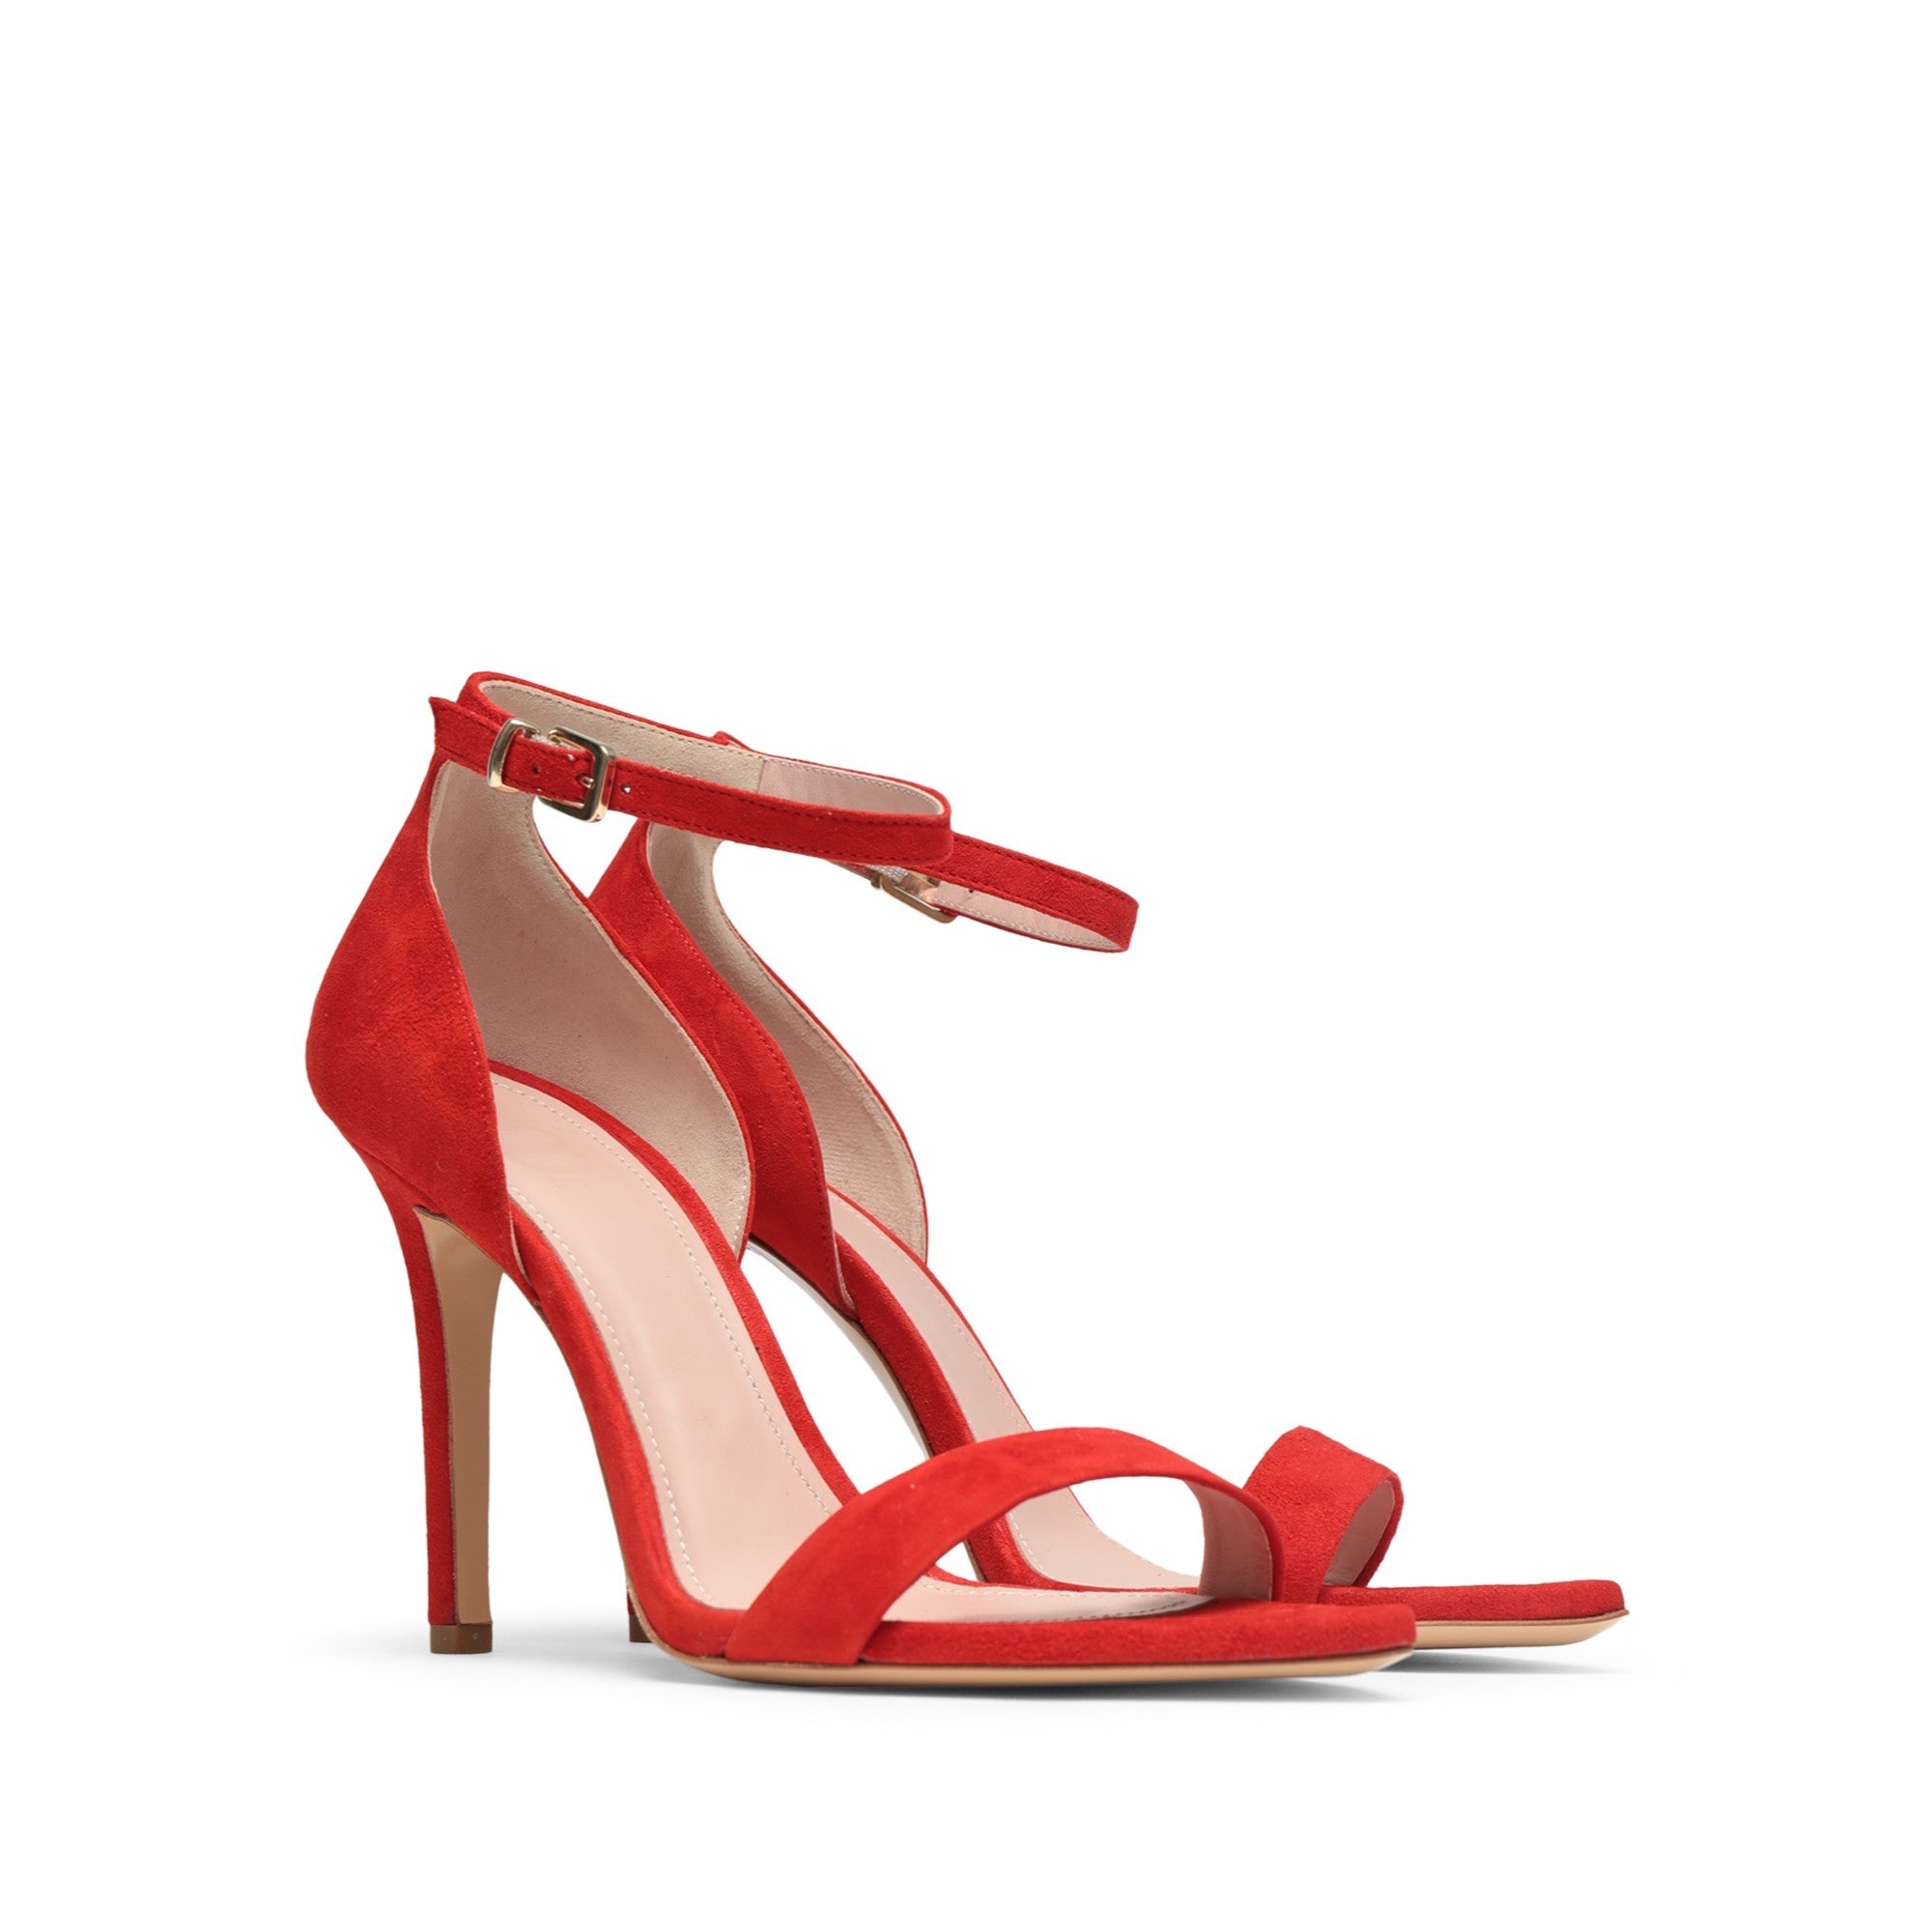 Women 8 By Yoox Sandals - Red